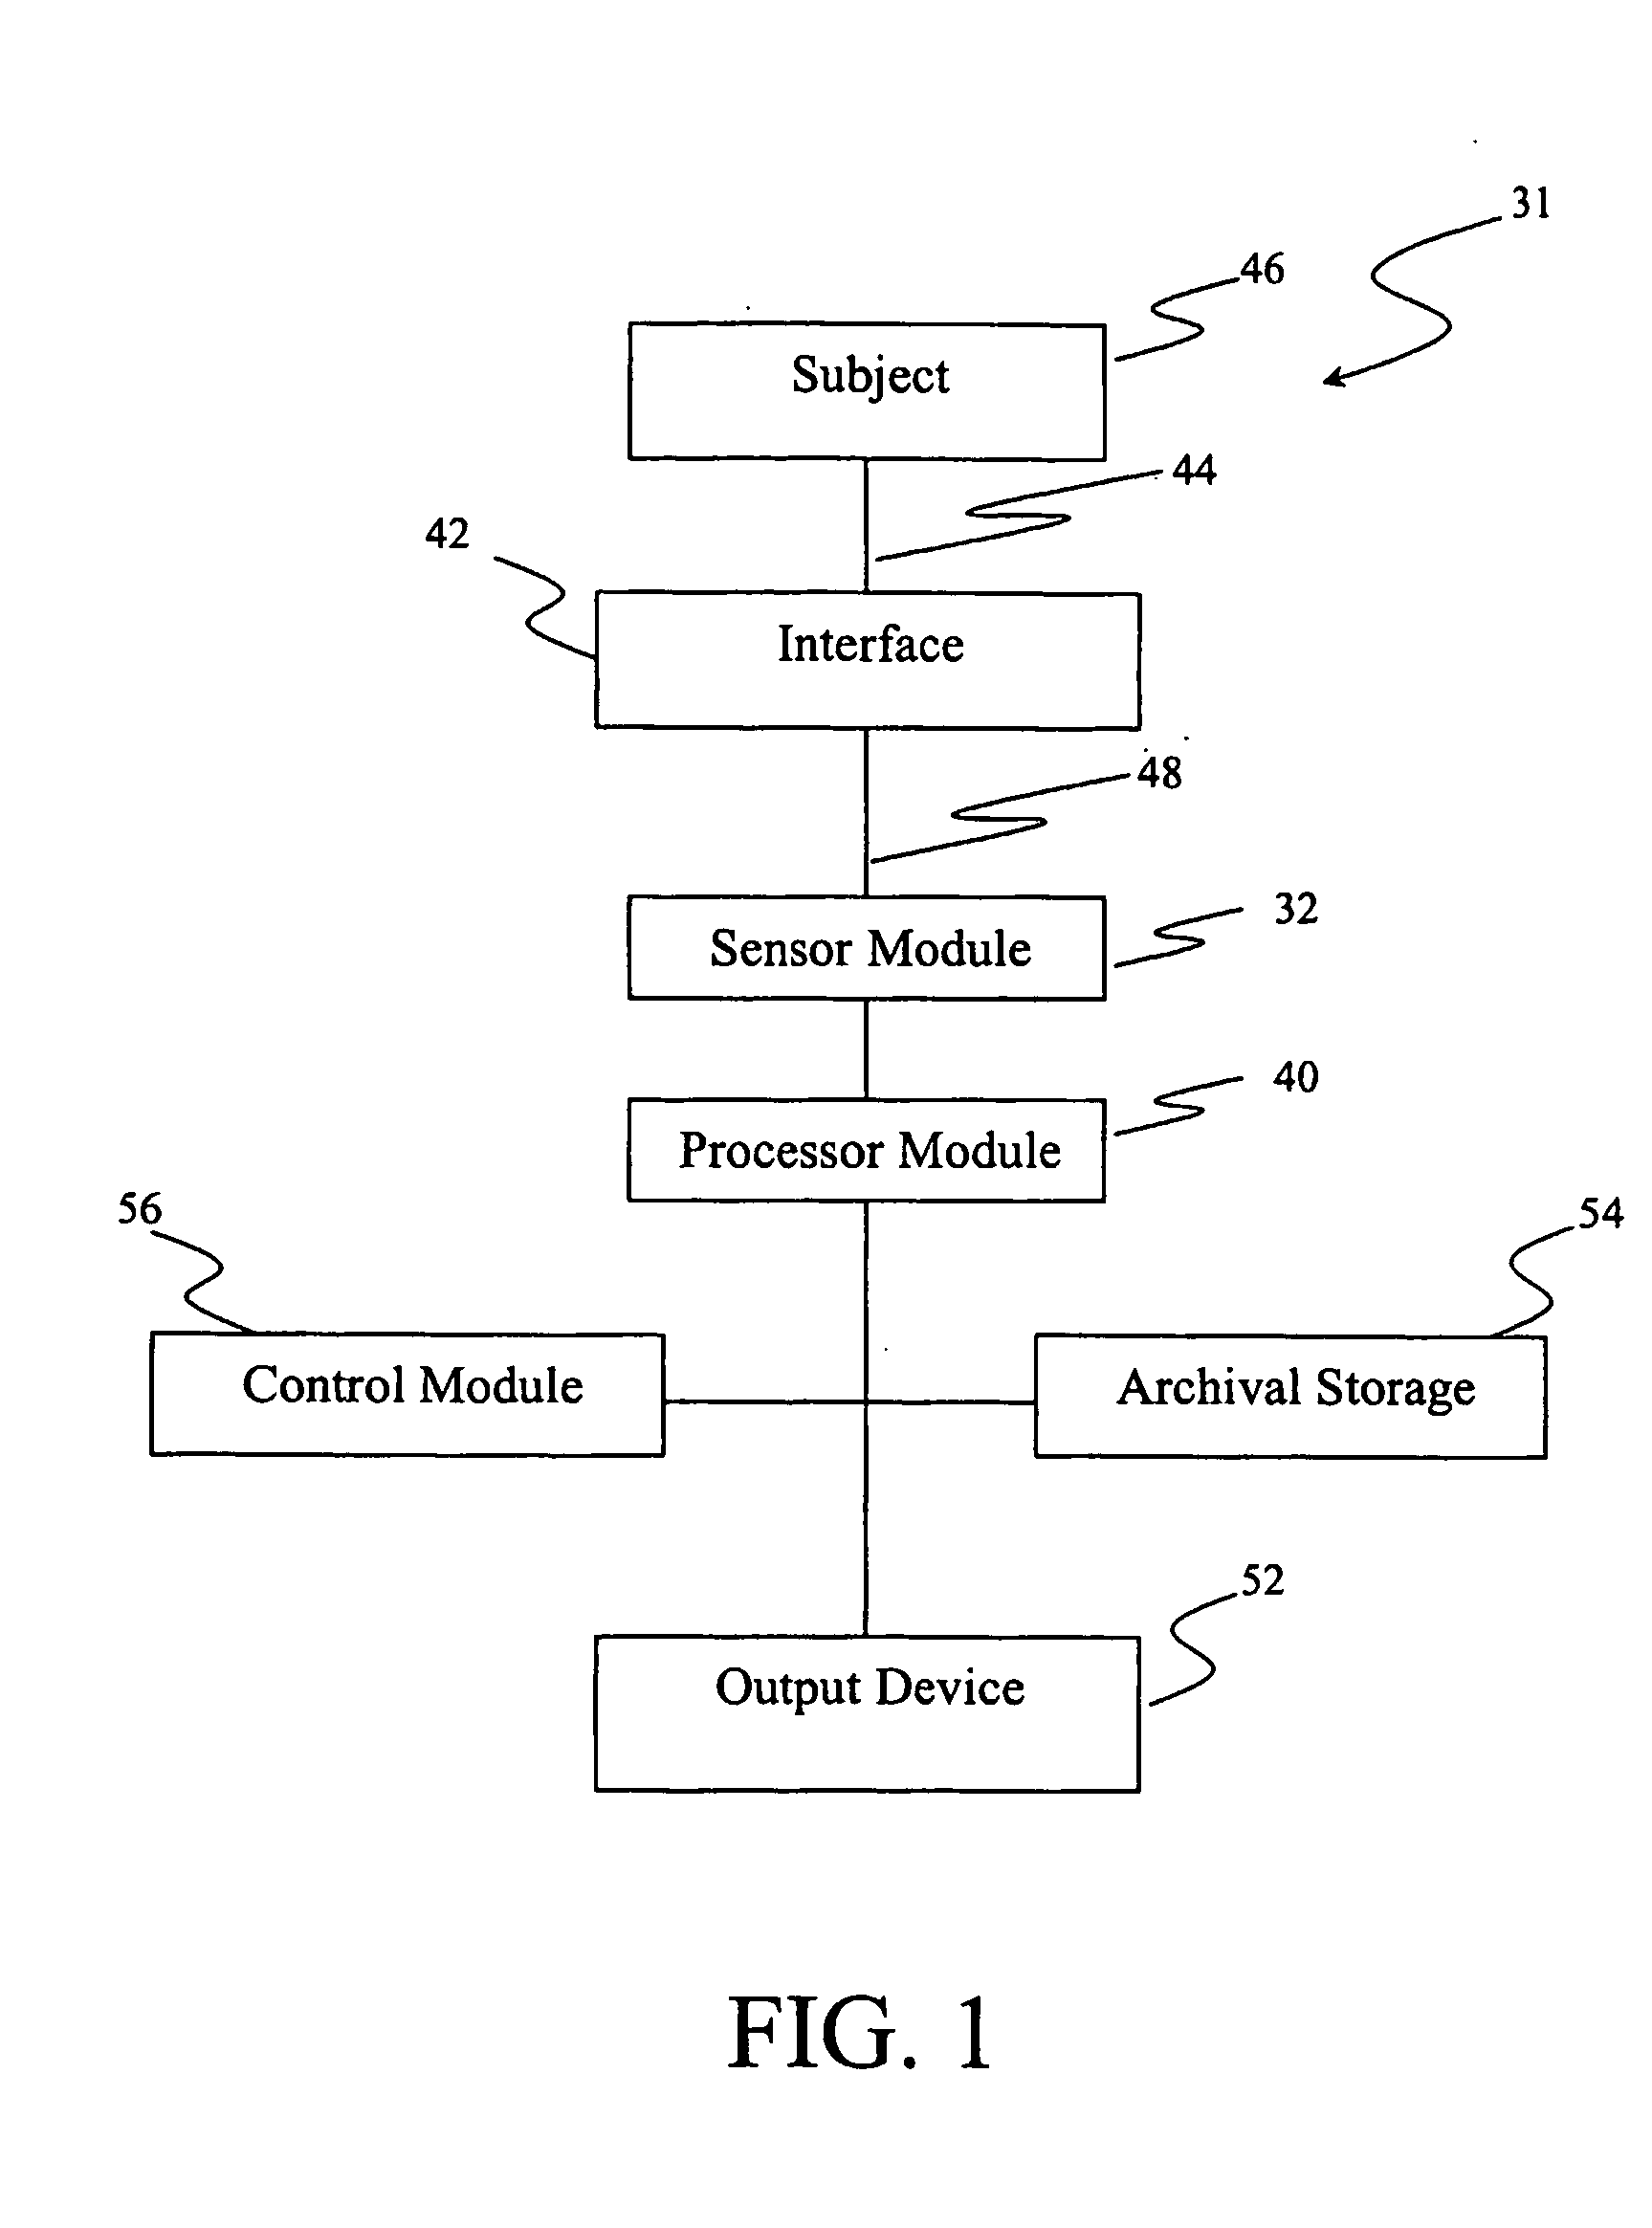 System and method for passive monitoring of blood pressure and pulse rate